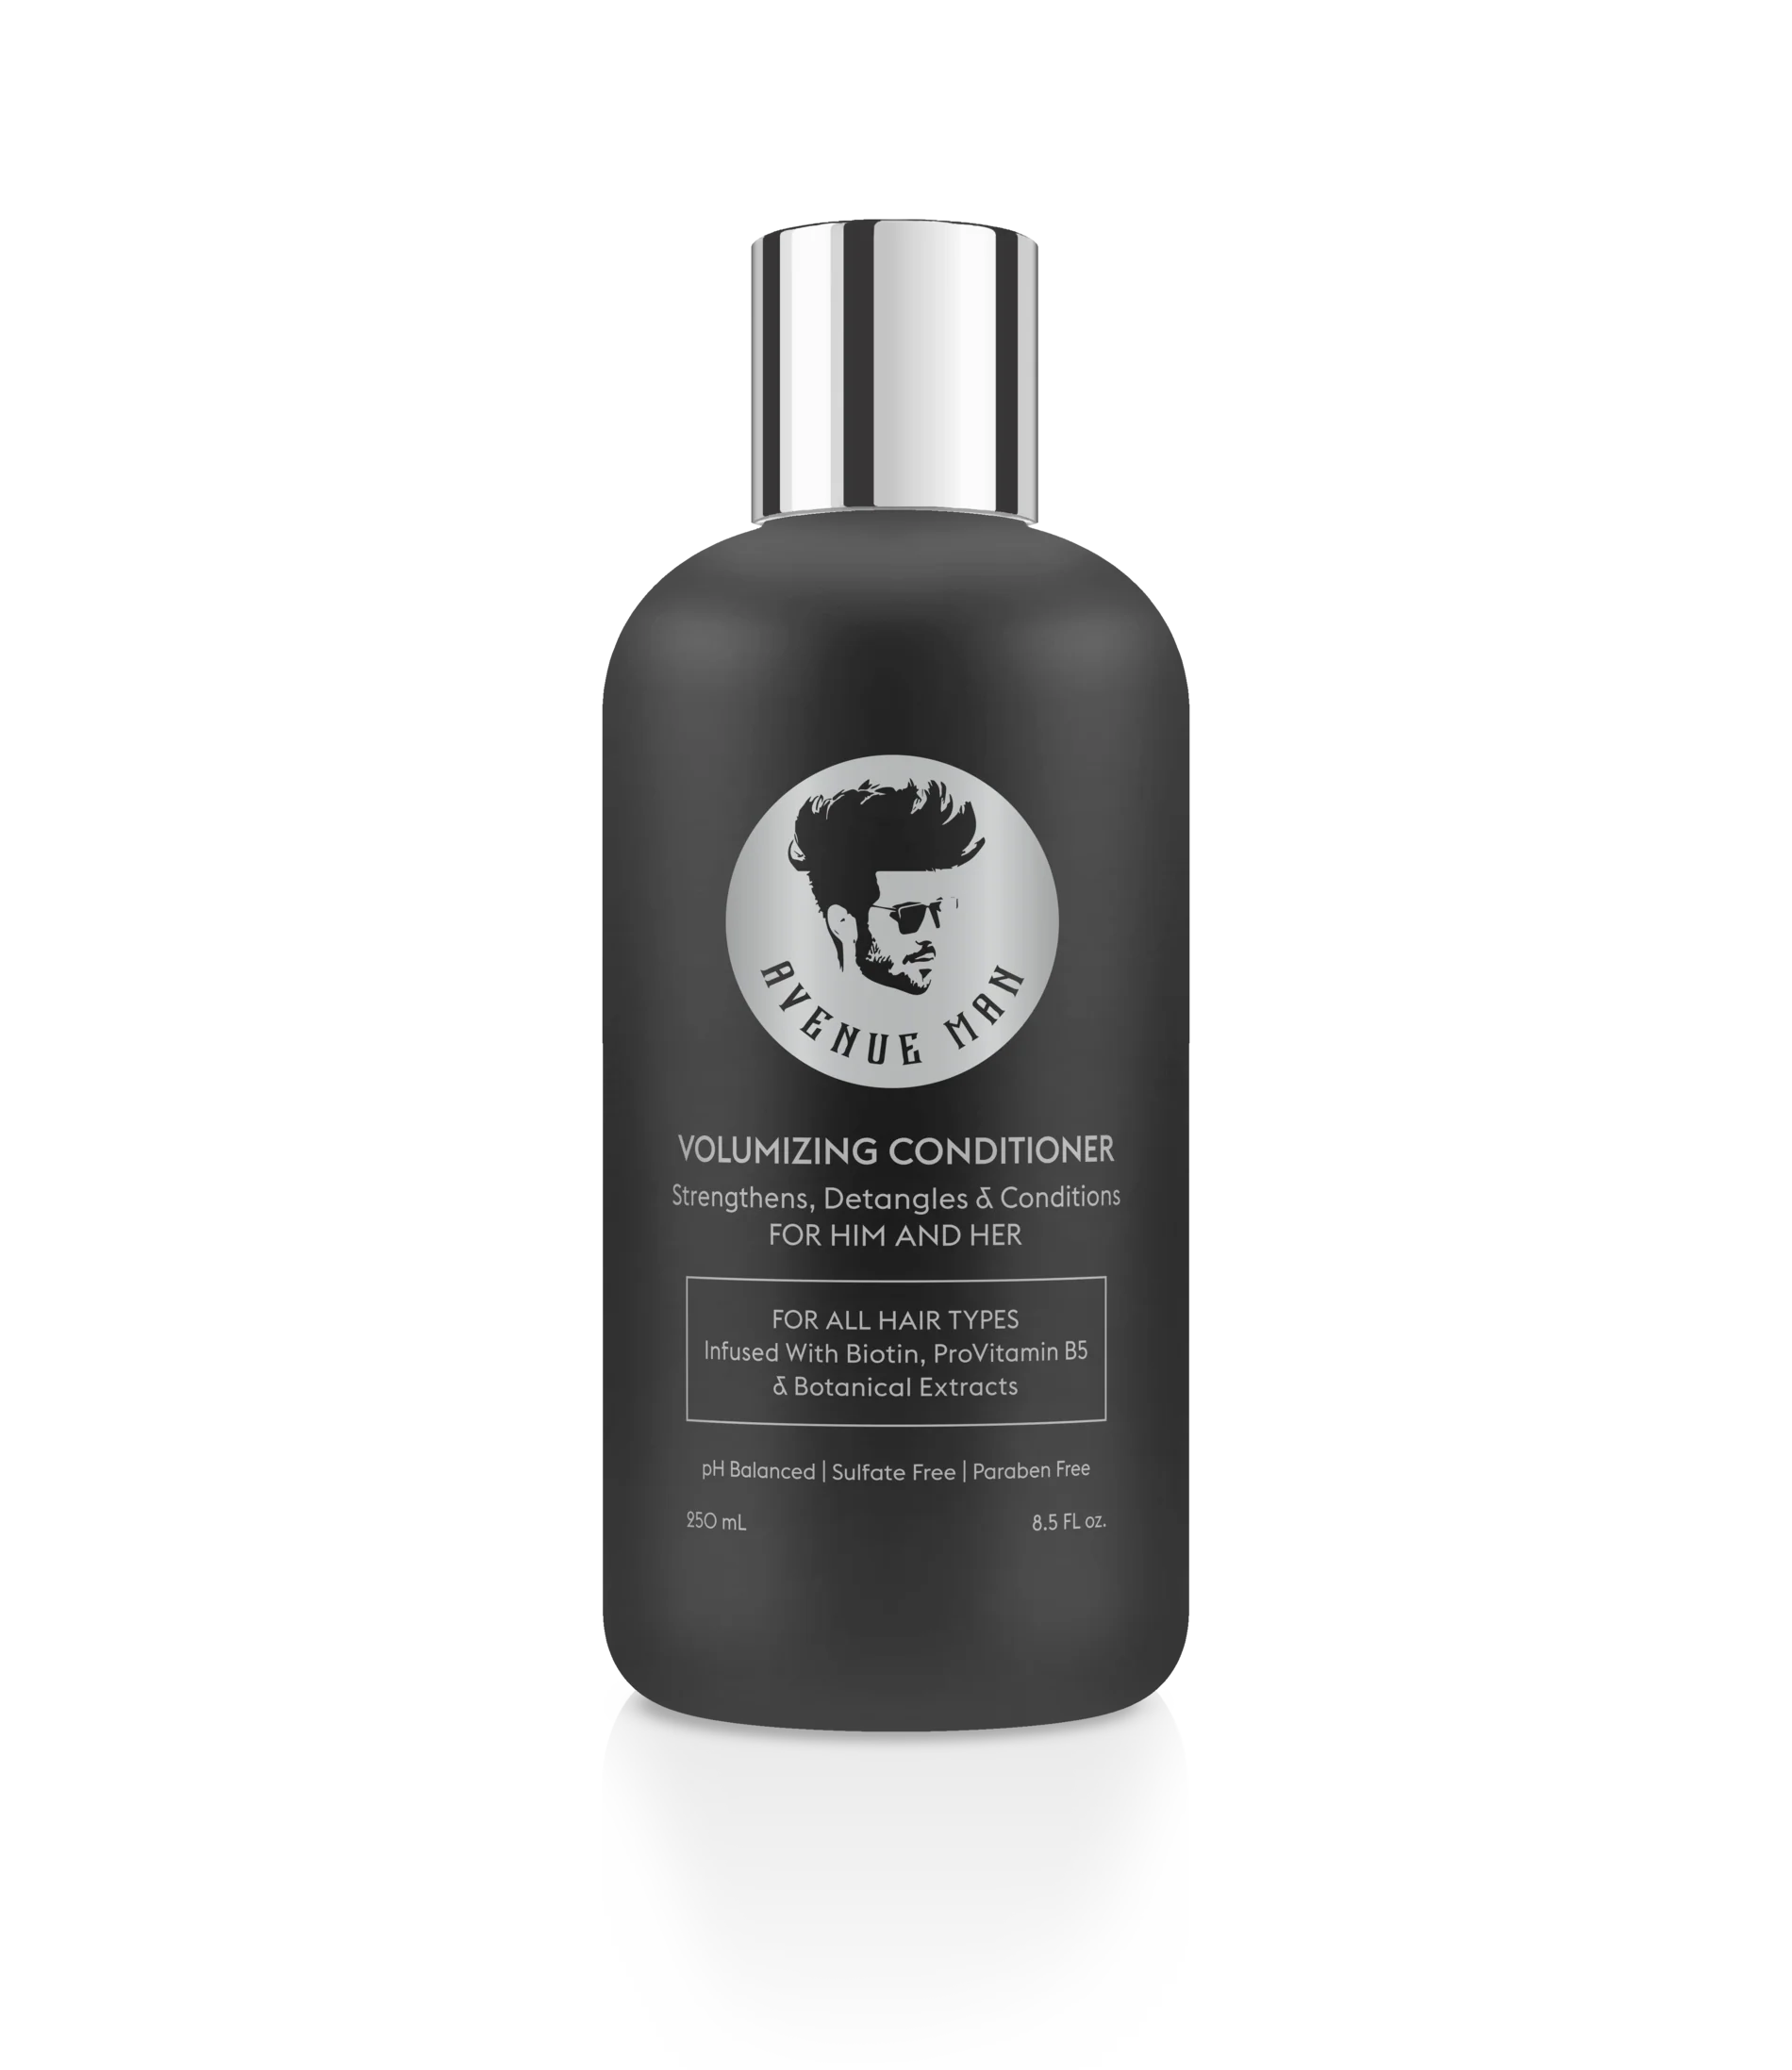 Volumizing Conditioner - Avenue Man Hair Products 